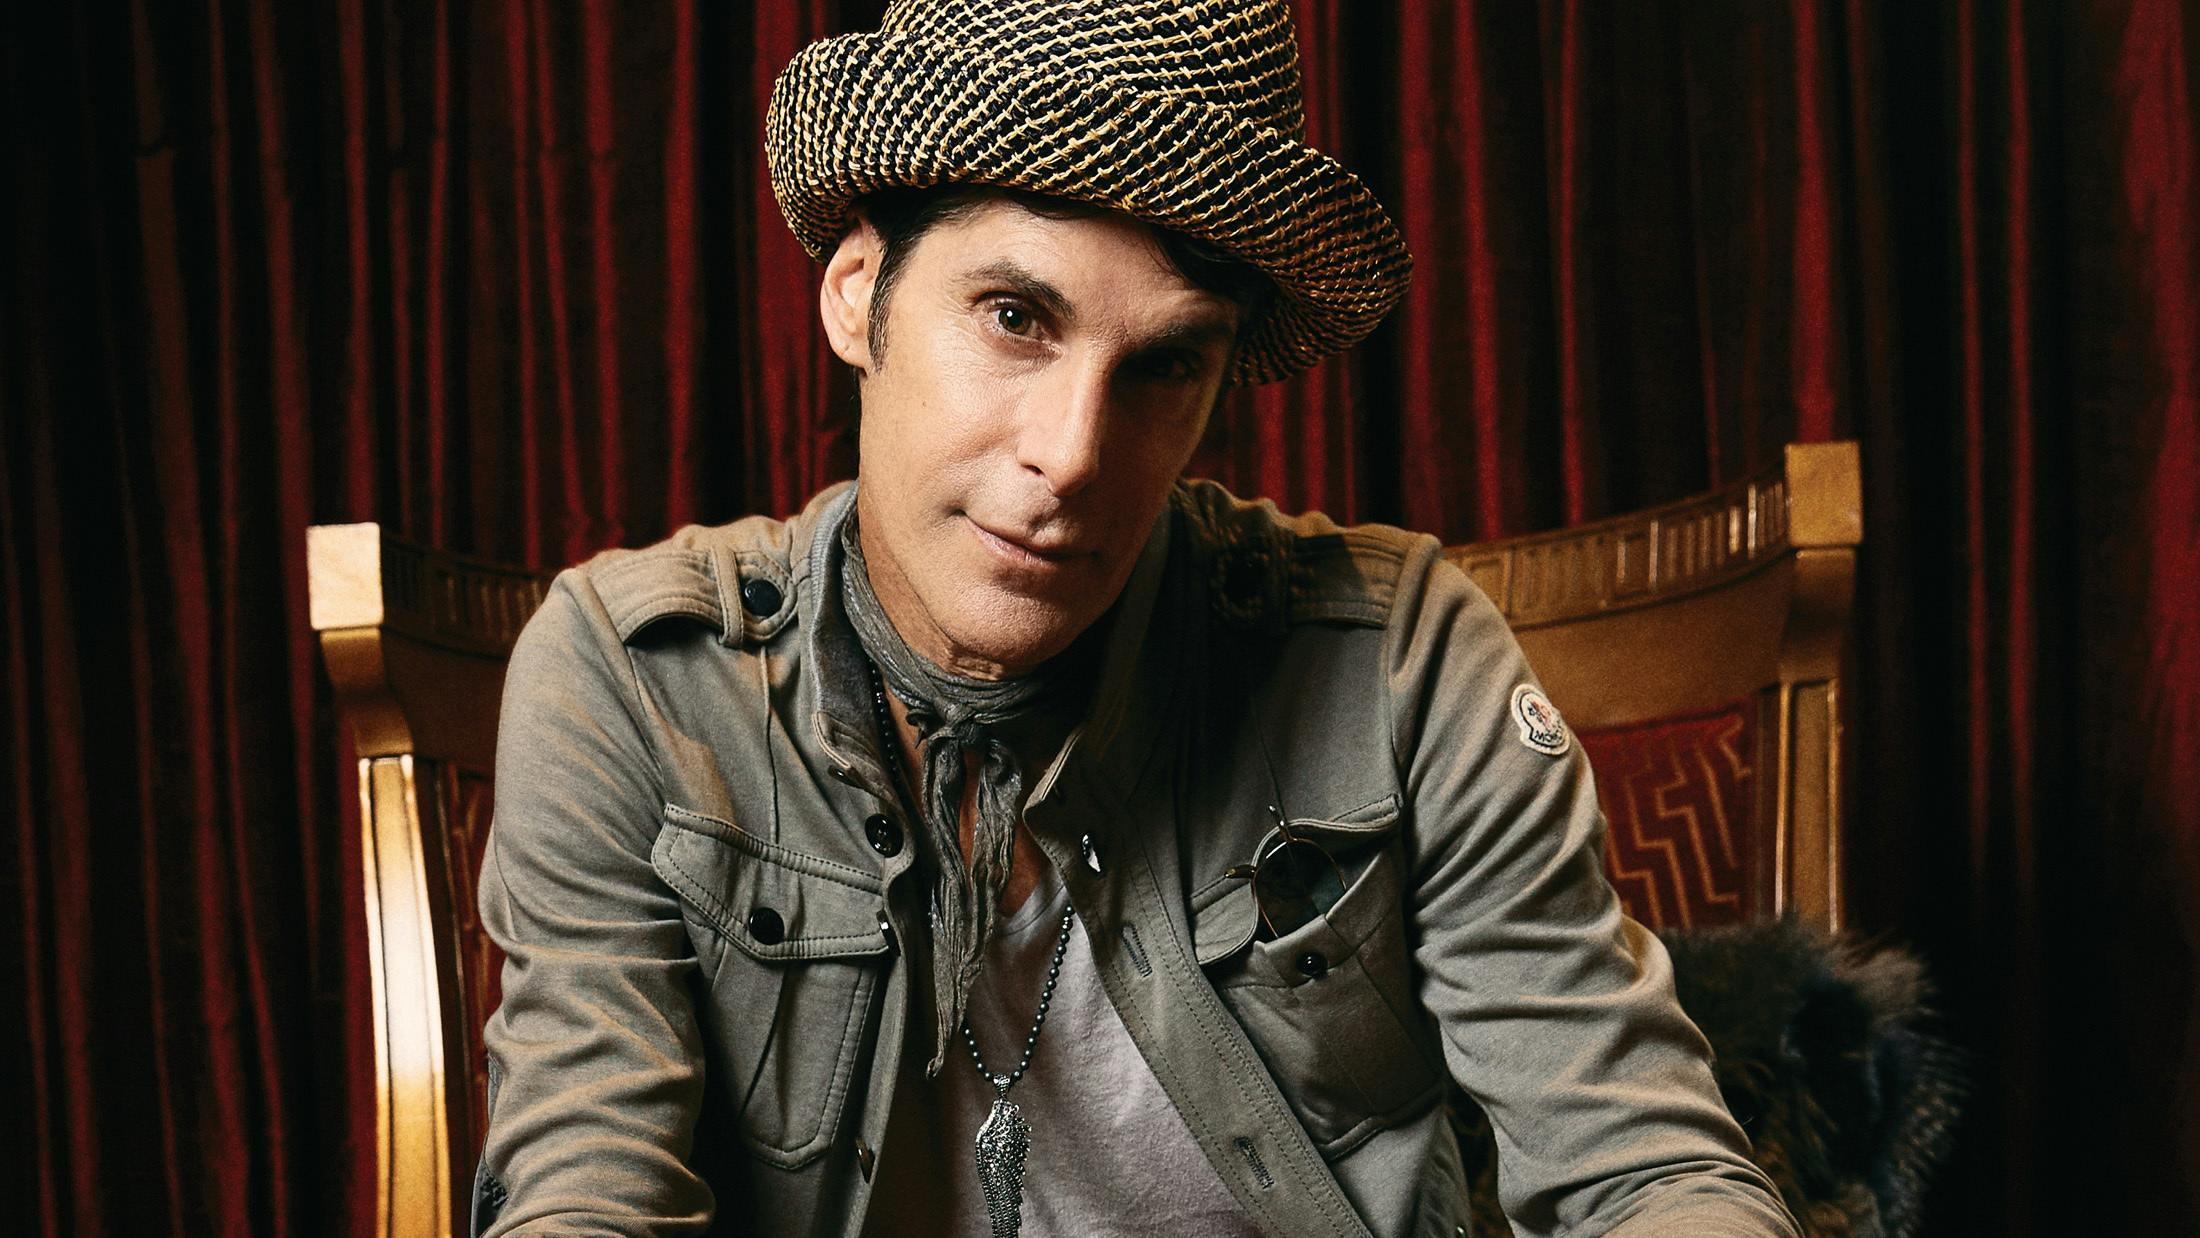 Perry Farrell: “You can’t write a great song if you don’t have a great life. If your life is a bore, you’re going to write about some bullsh*t”